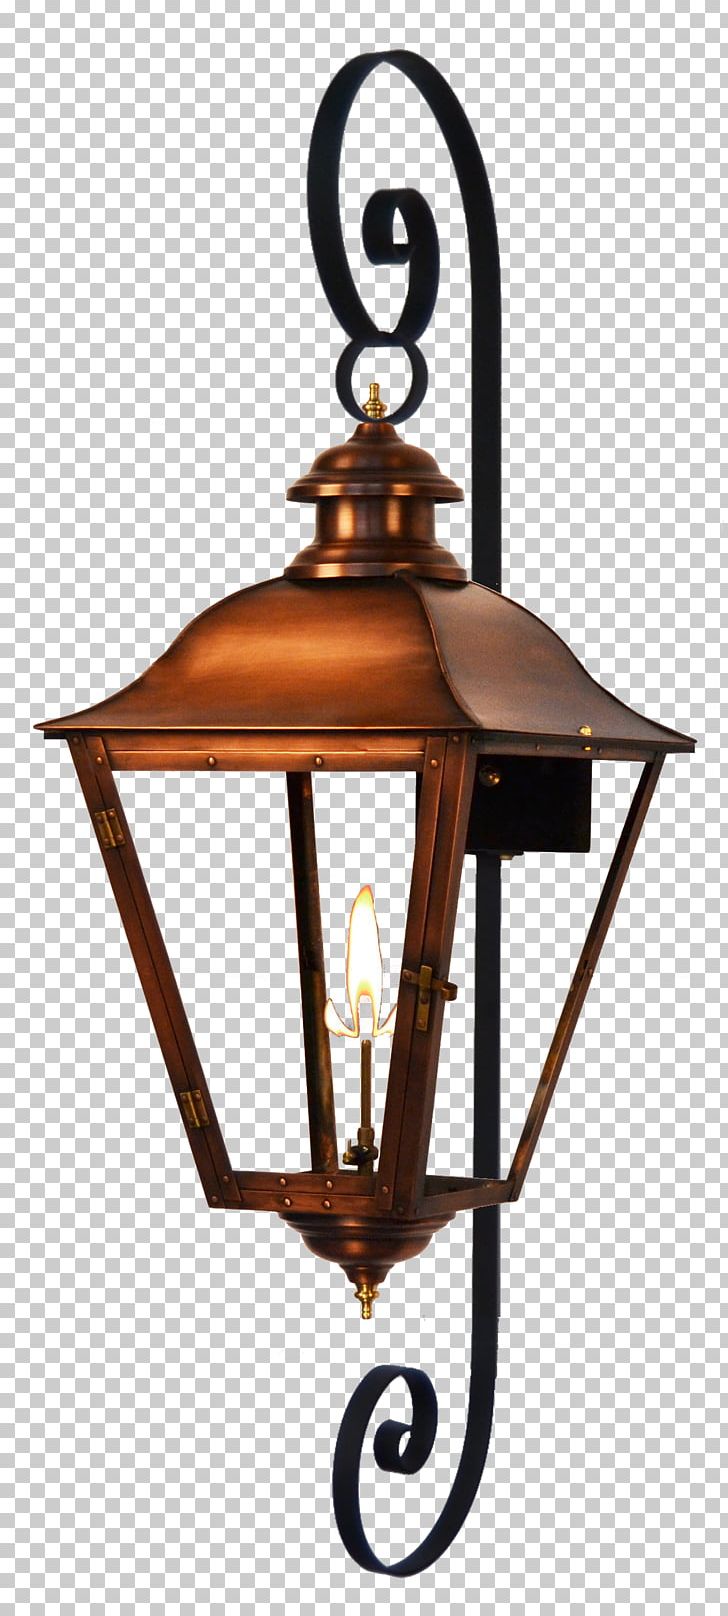 Gas Lighting Light Fixture Lantern Sconce PNG, Clipart, Ceiling Fixture, Coppersmith, Electric Light, Gas Burner, Gas Lighting Free PNG Download